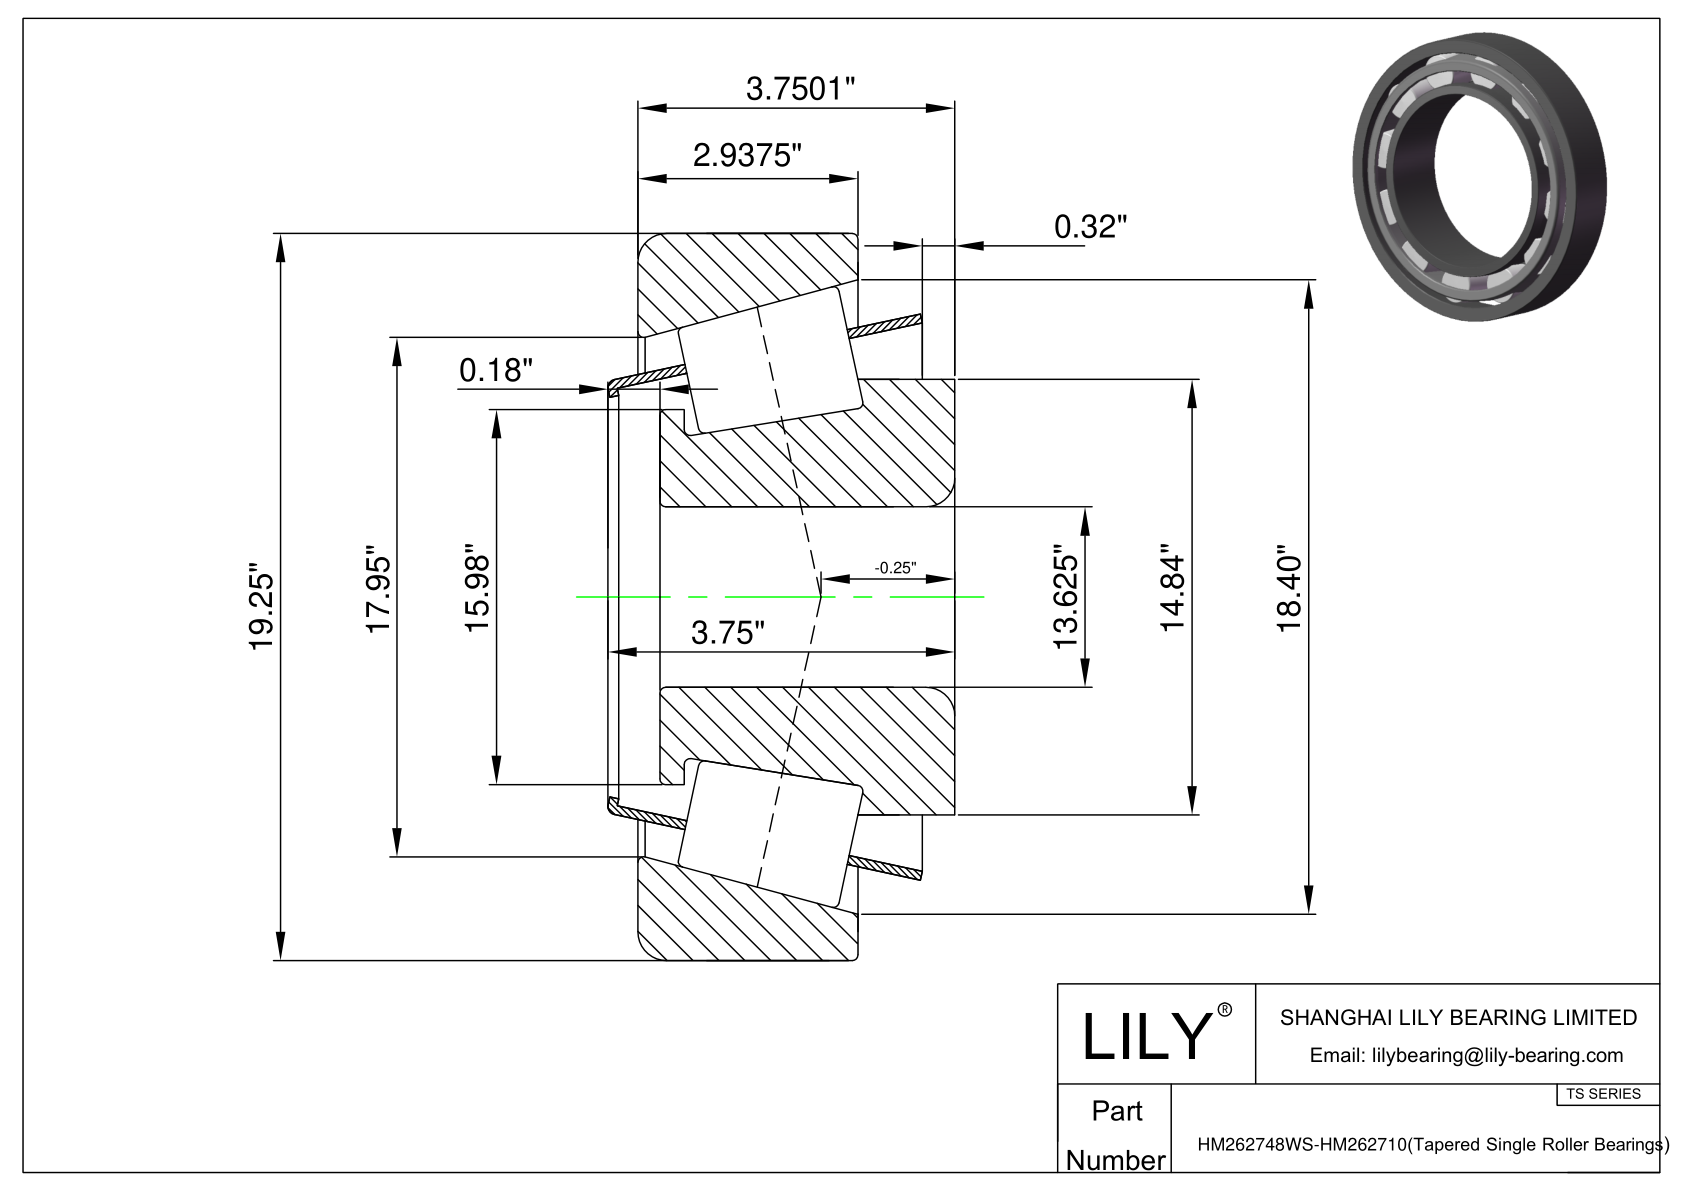 HM262748WS-HM262710 TS (Tapered Single Roller Bearings) (Imperial) cad drawing